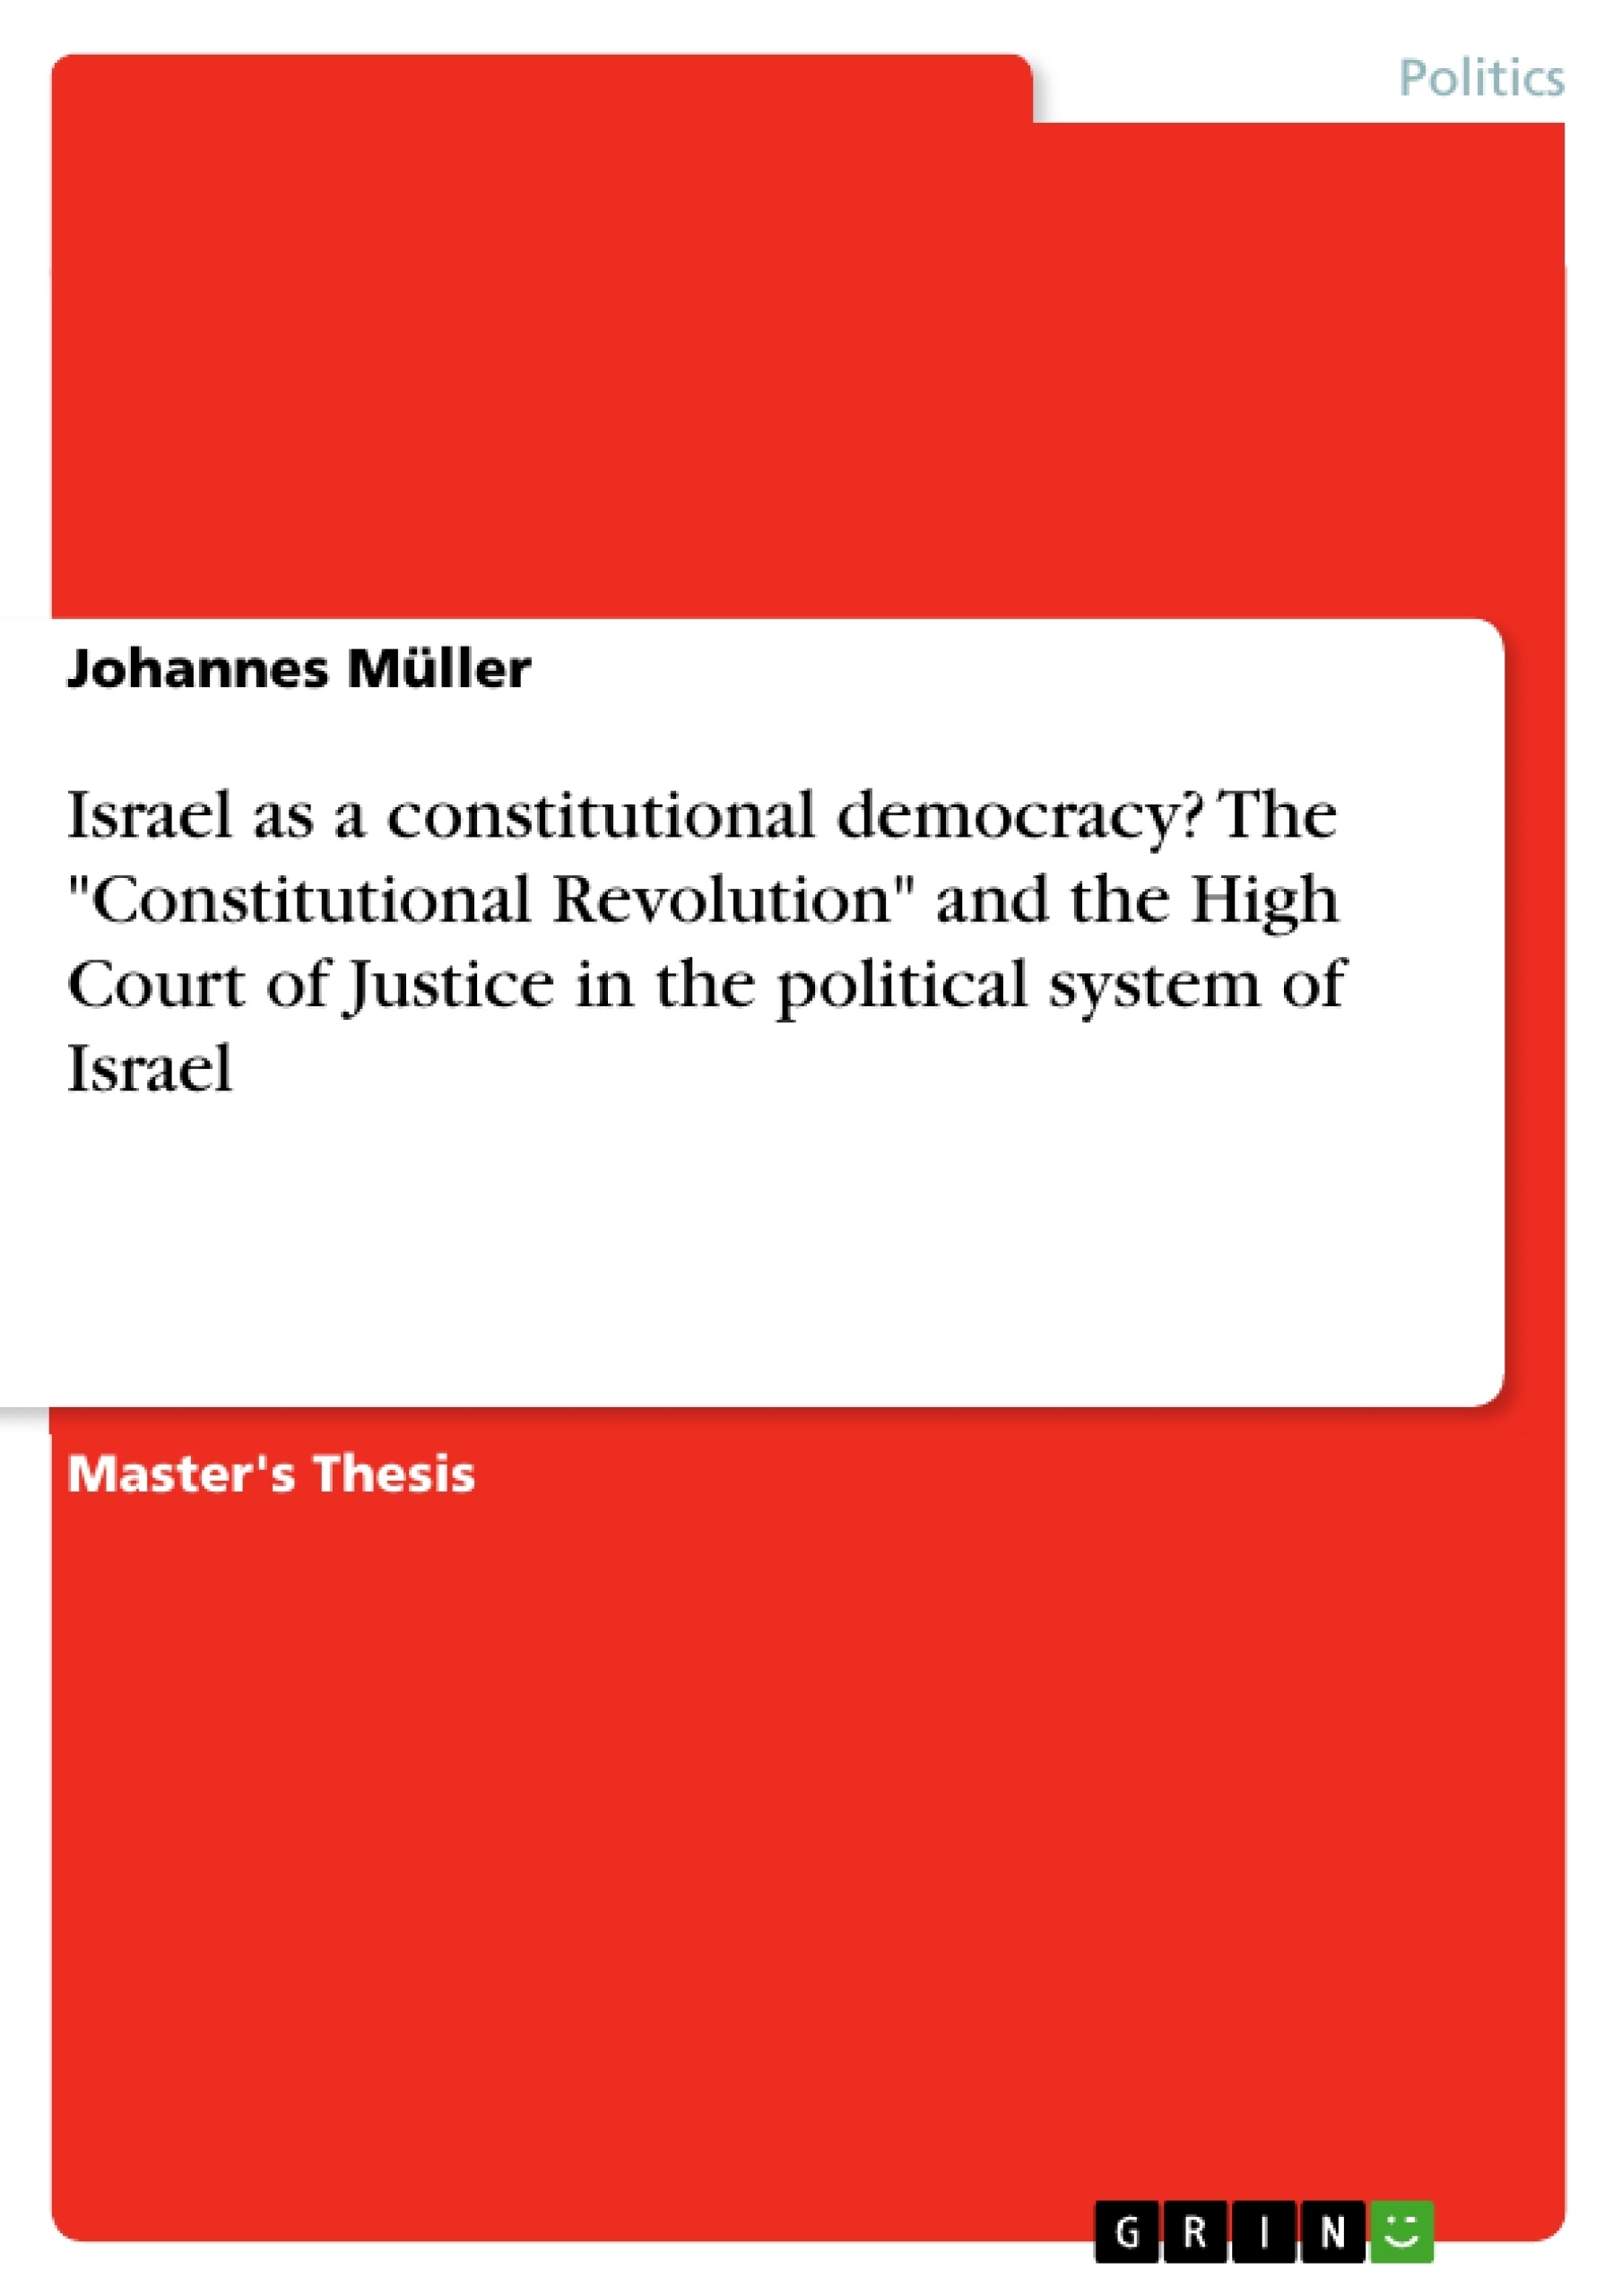 Titre: Israel as a constitutional democracy? The "Constitutional Revolution" and the High Court of Justice in the political system of Israel